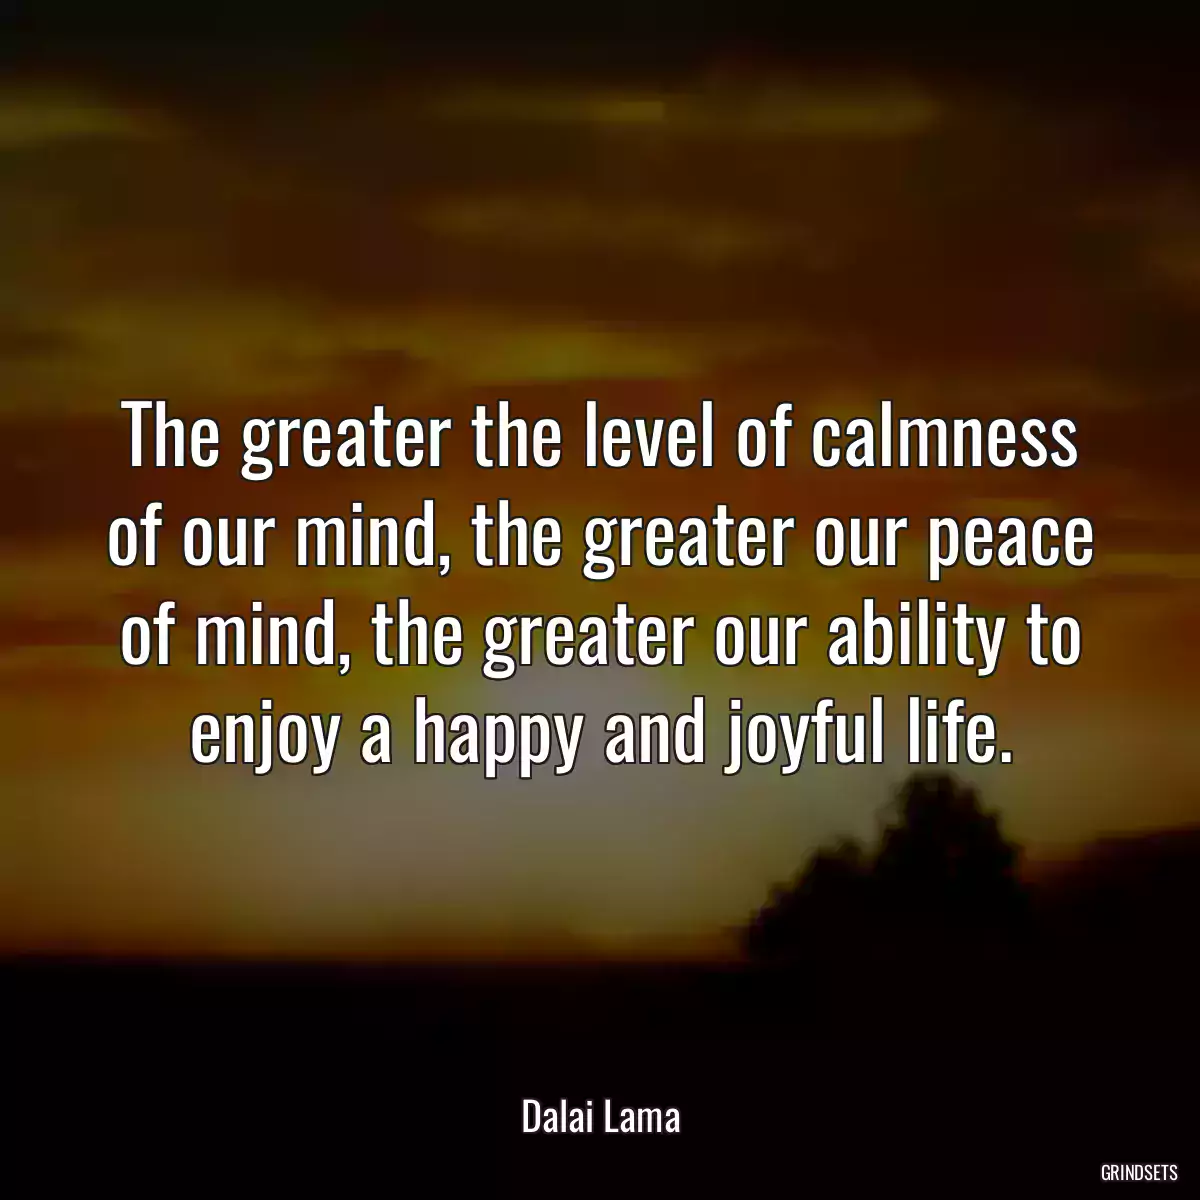 The greater the level of calmness of our mind, the greater our peace of mind, the greater our ability to enjoy a happy and joyful life.